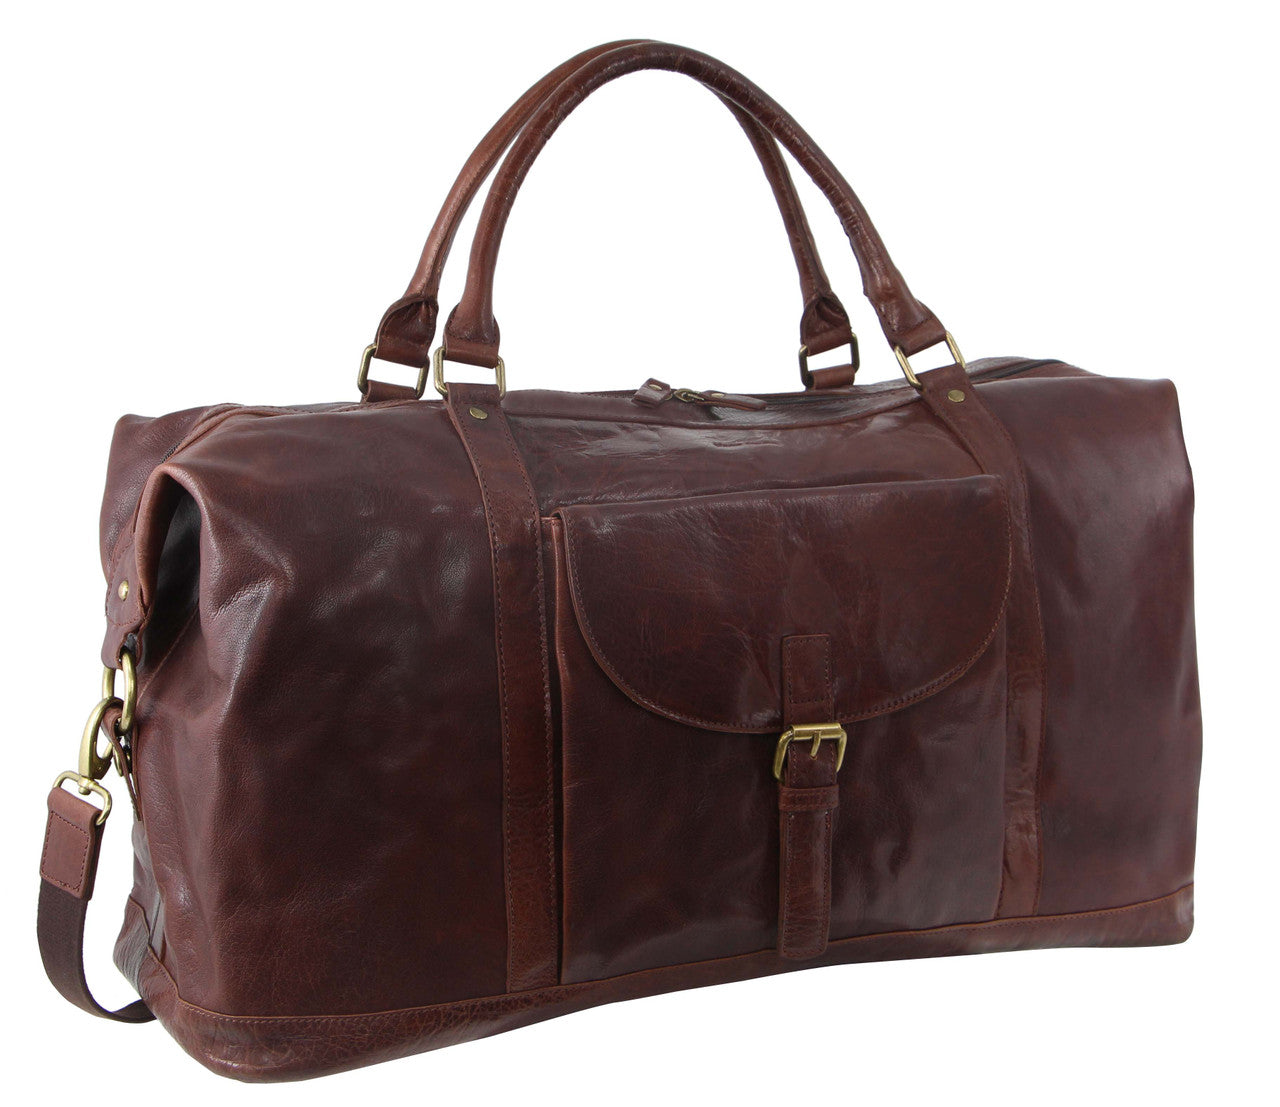 Pierre Cardin Rustic Leather Overnight Bag with front flap pocket PC3134 Chesnut-1